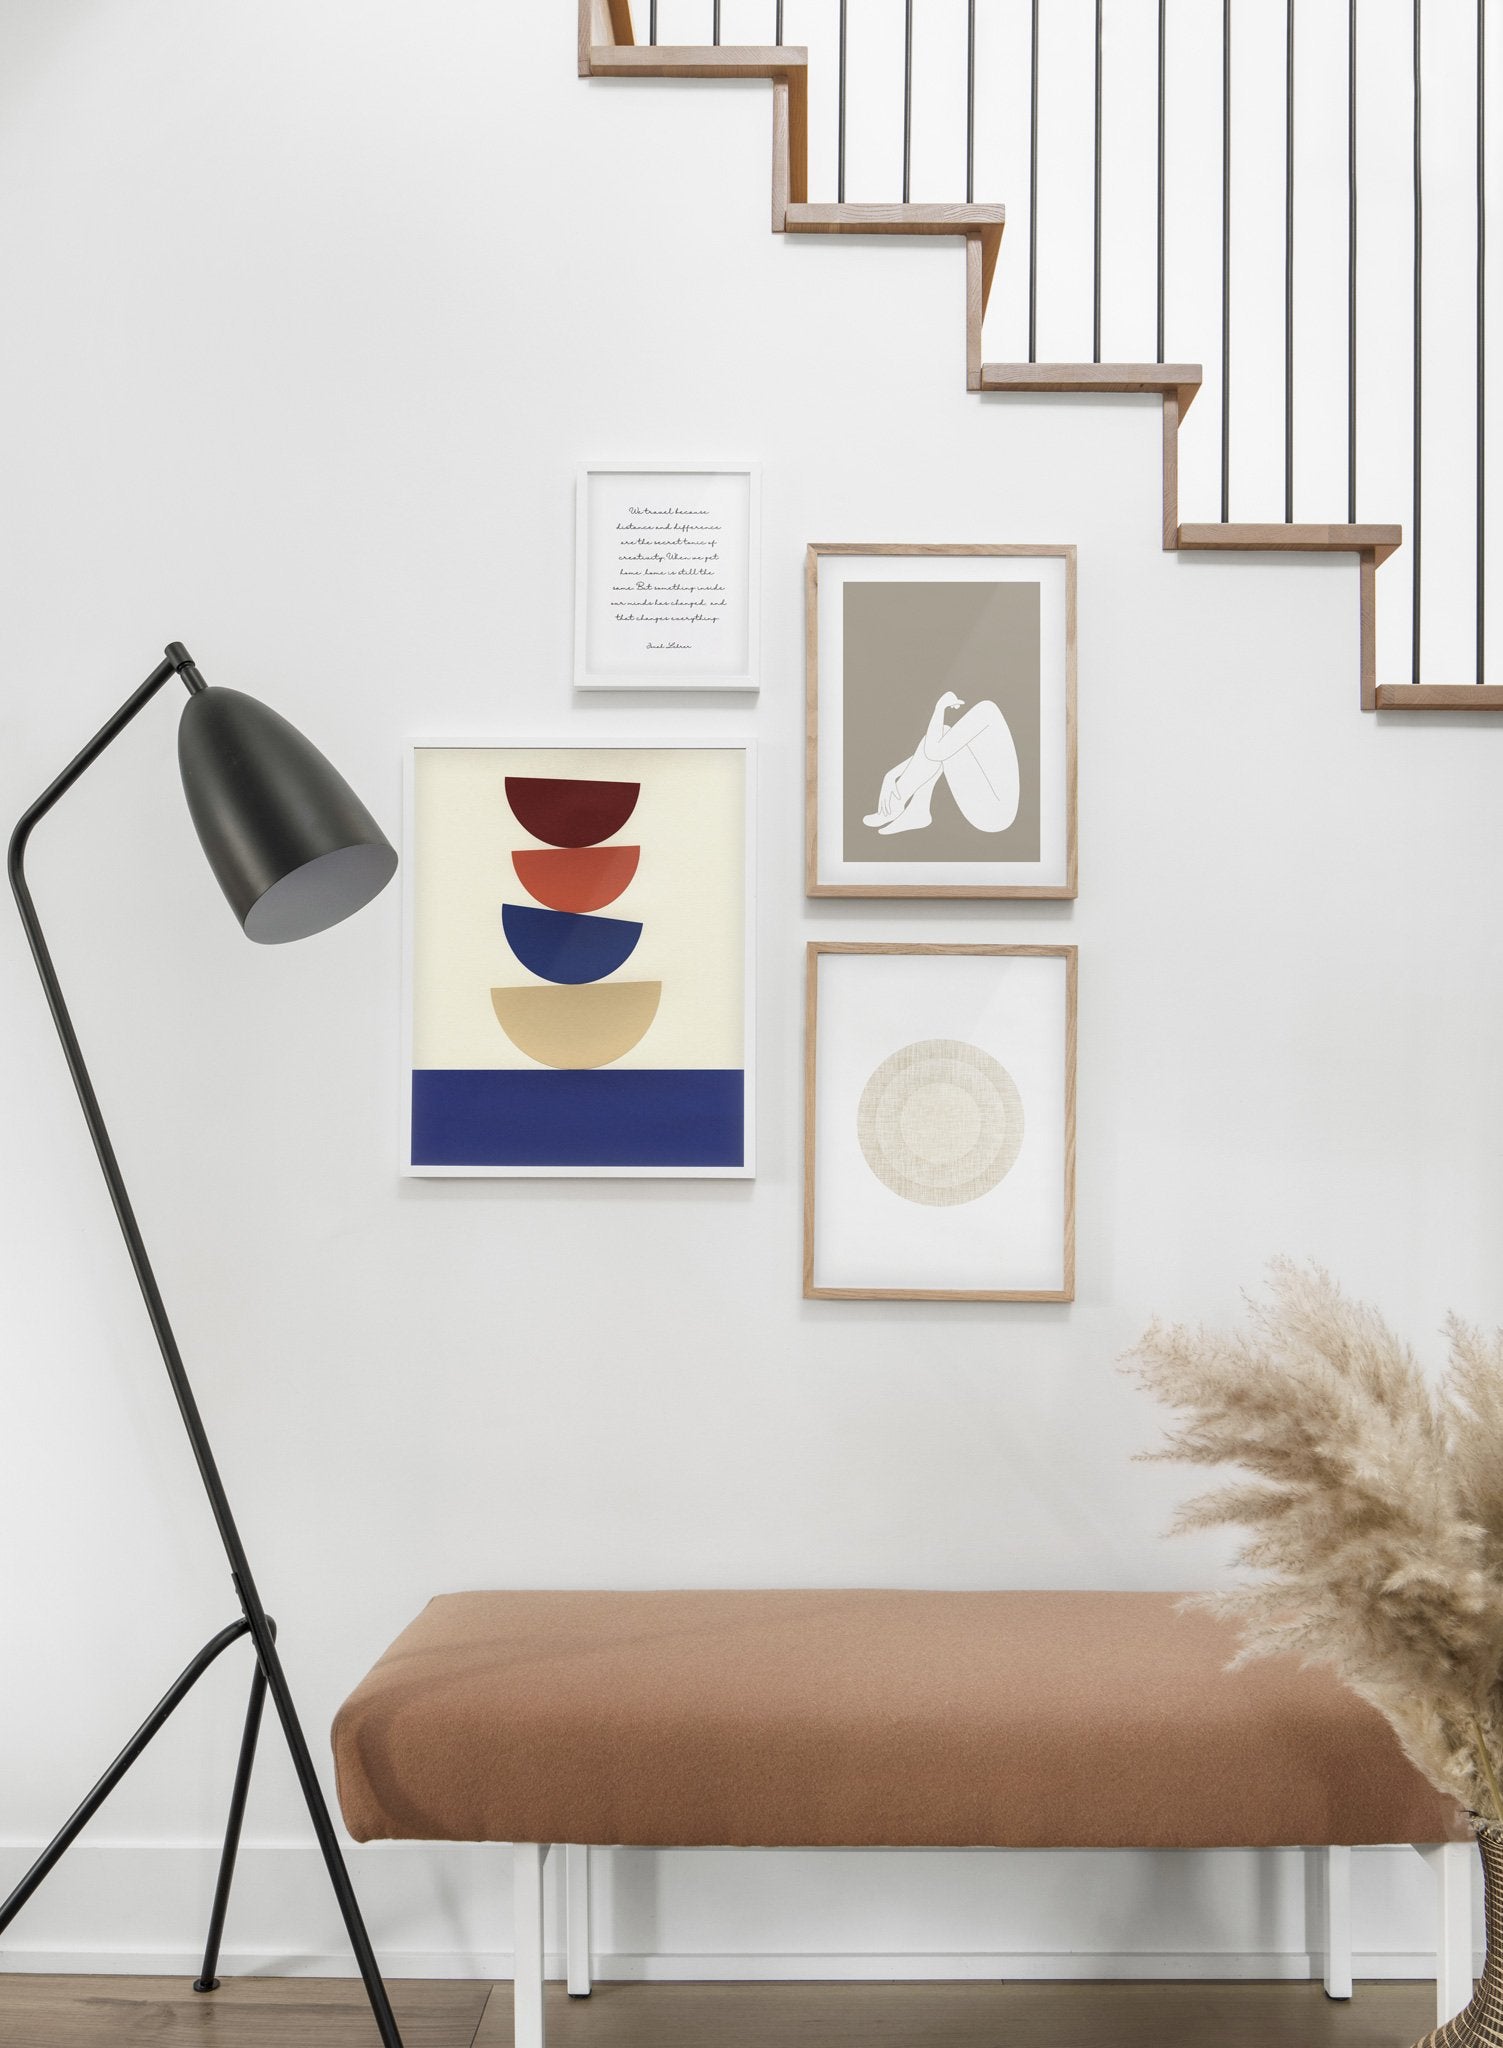 Modern minimalist poster by Opposite Wall with abstract collage illustration of balanced bowl shapes - Hallway